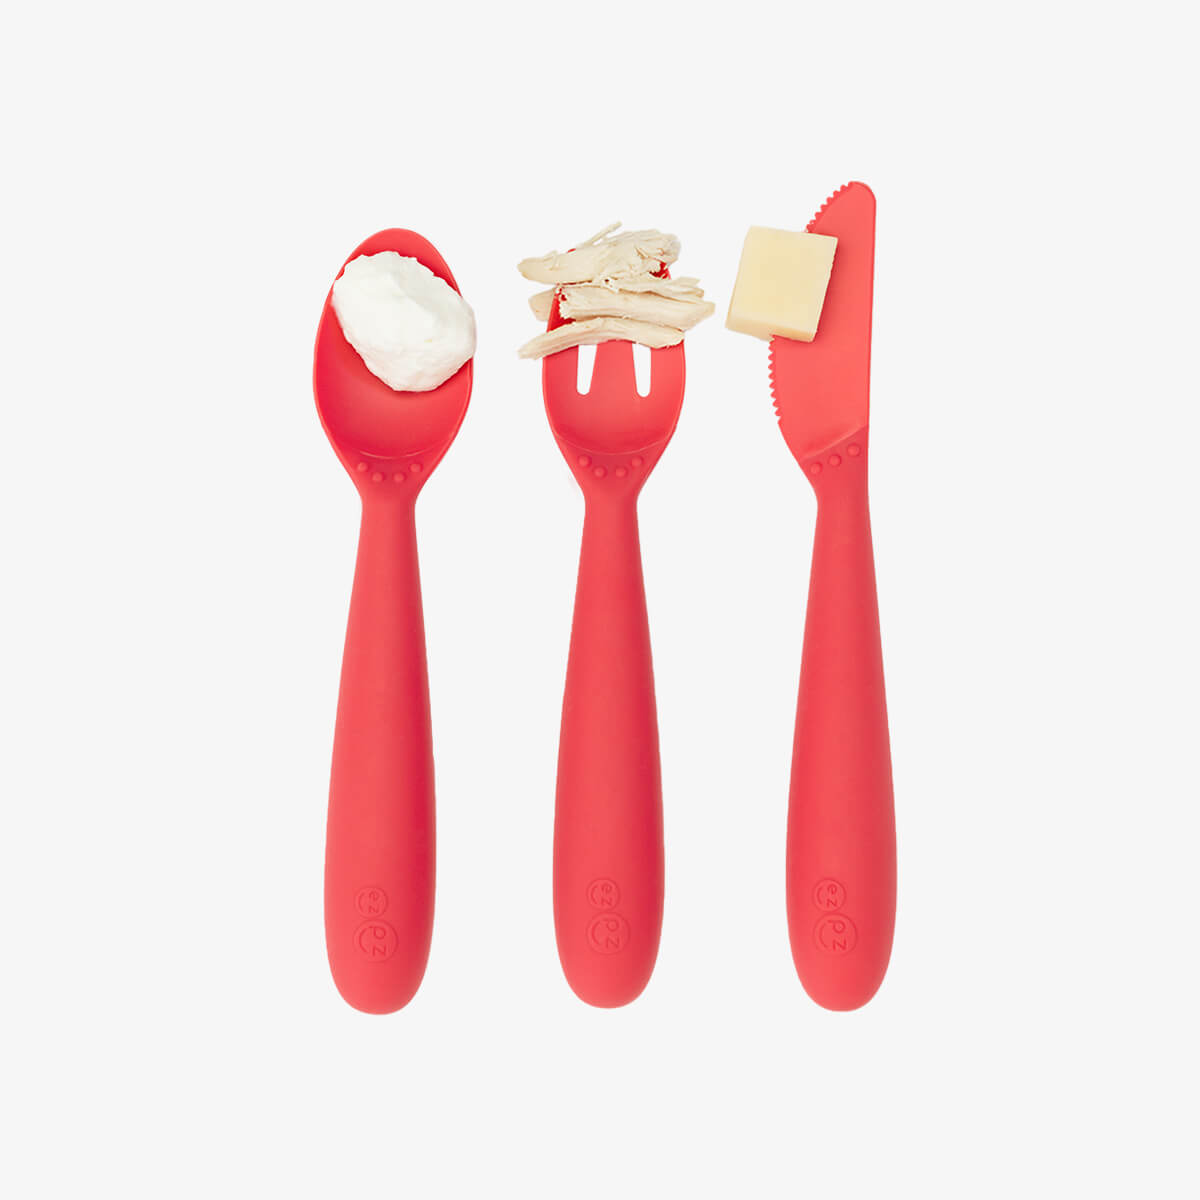 Easy to Hold Utensils- Knife Fork and Spoon Set- Red